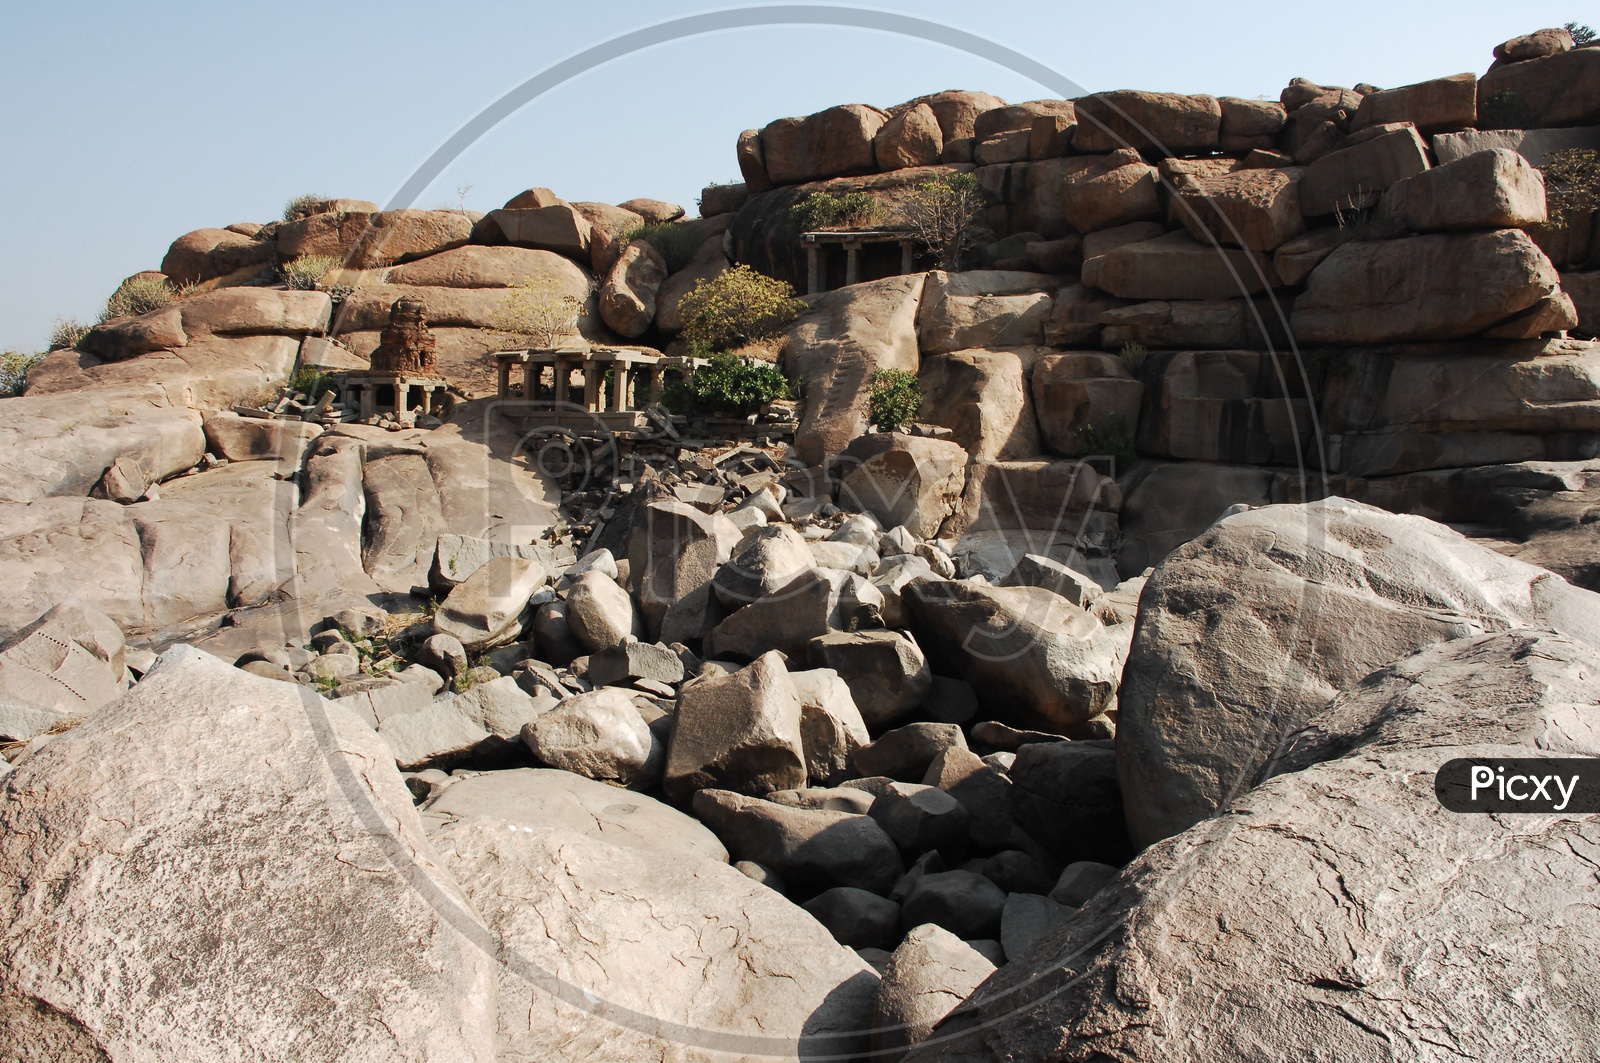 An open area with large rocks